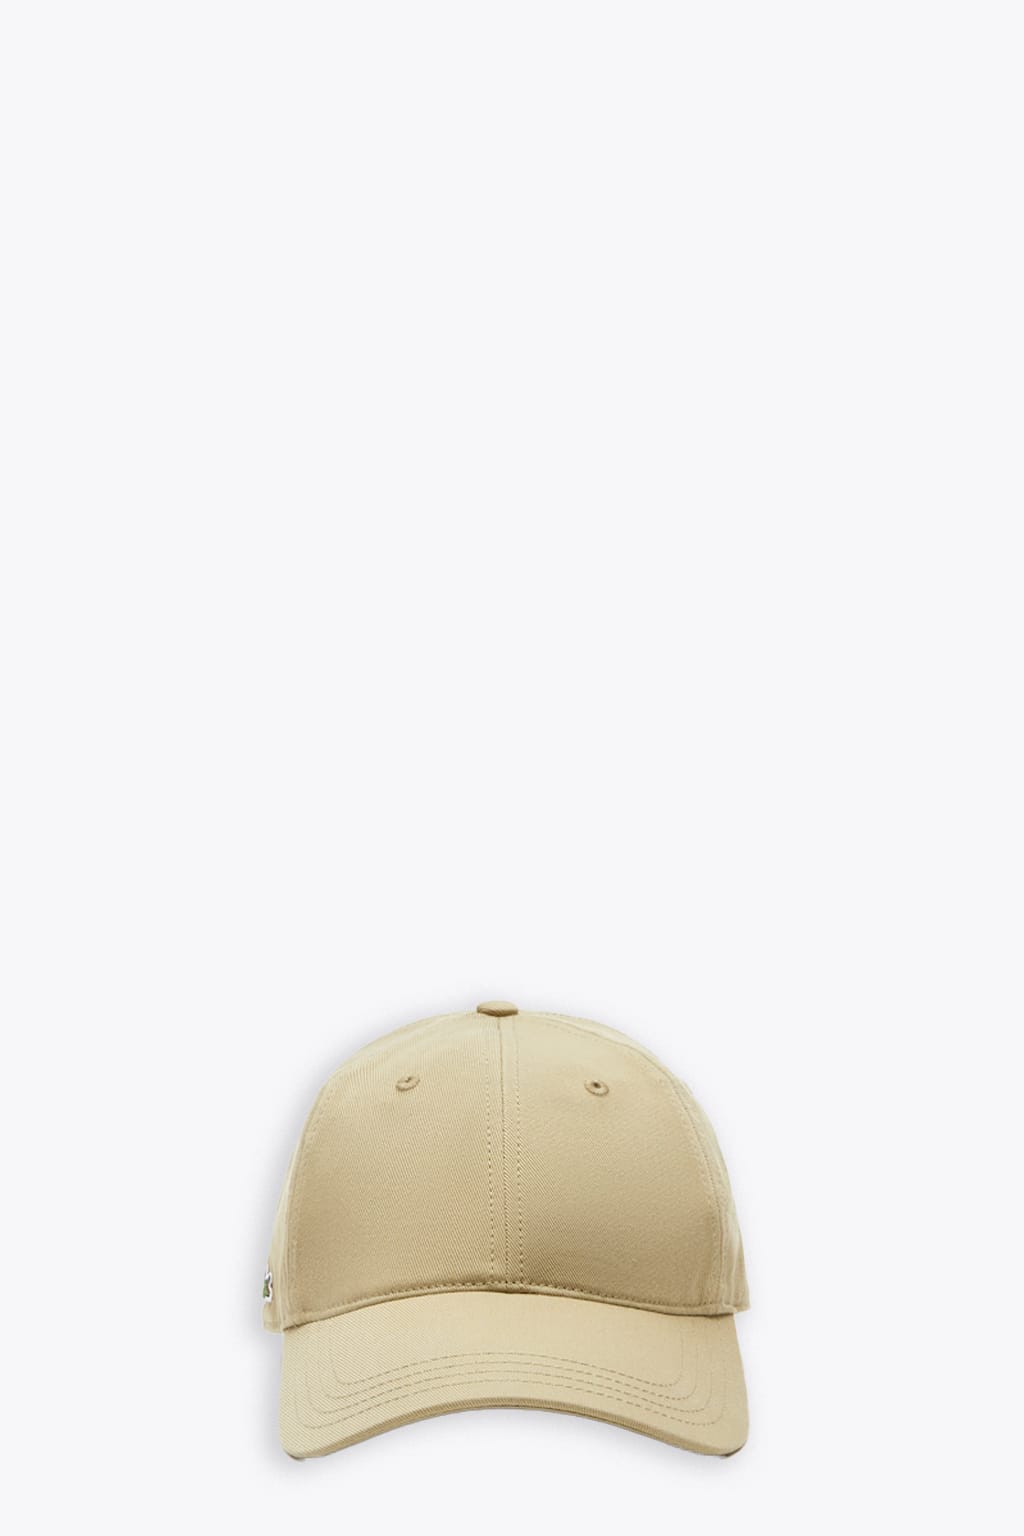 LACOSTE CAPPELLINO BEIGE COTTON CAP WITH SIDE LOGO PATCH